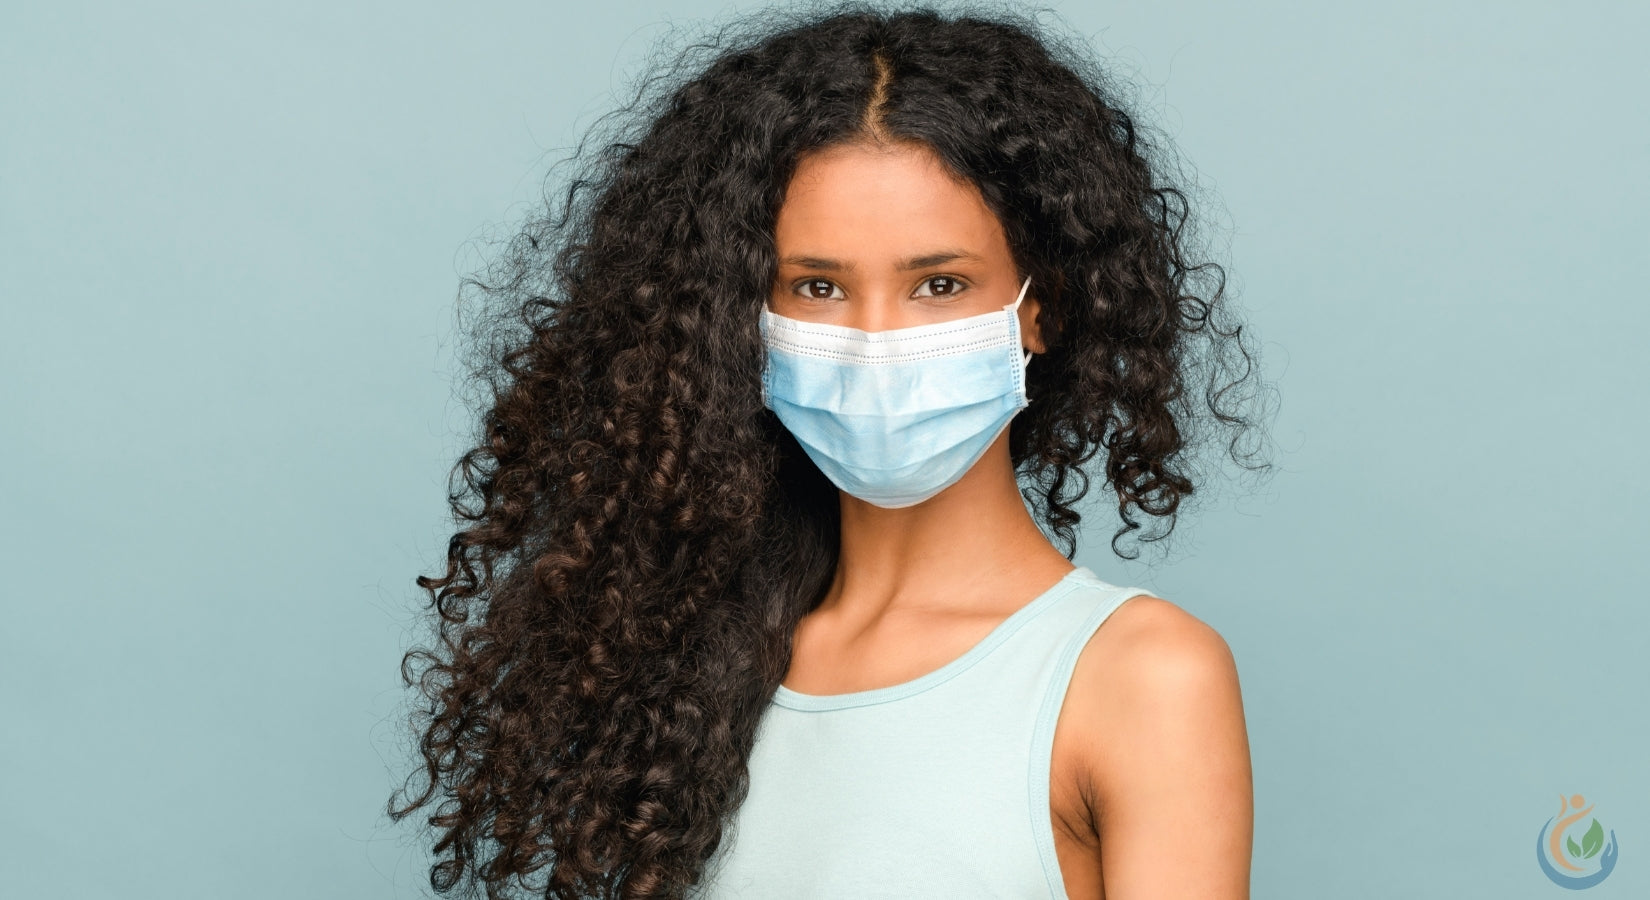 Beautiful woman with long curly, dark hair and with a covid-19 face mask on a light blue background